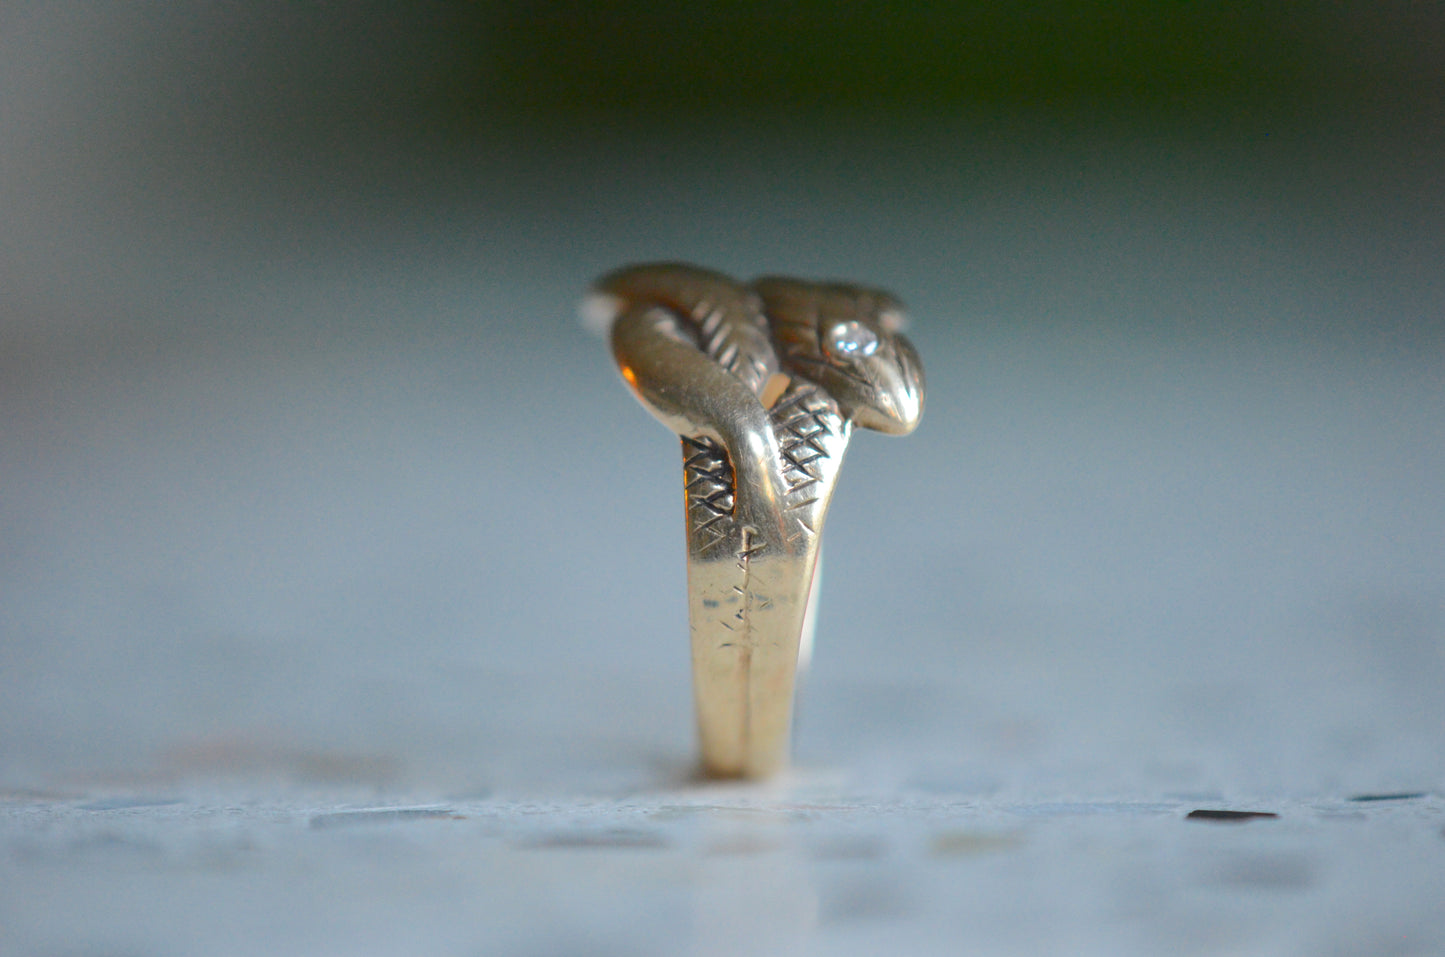 Handsome Midcentury Double Snake Ring